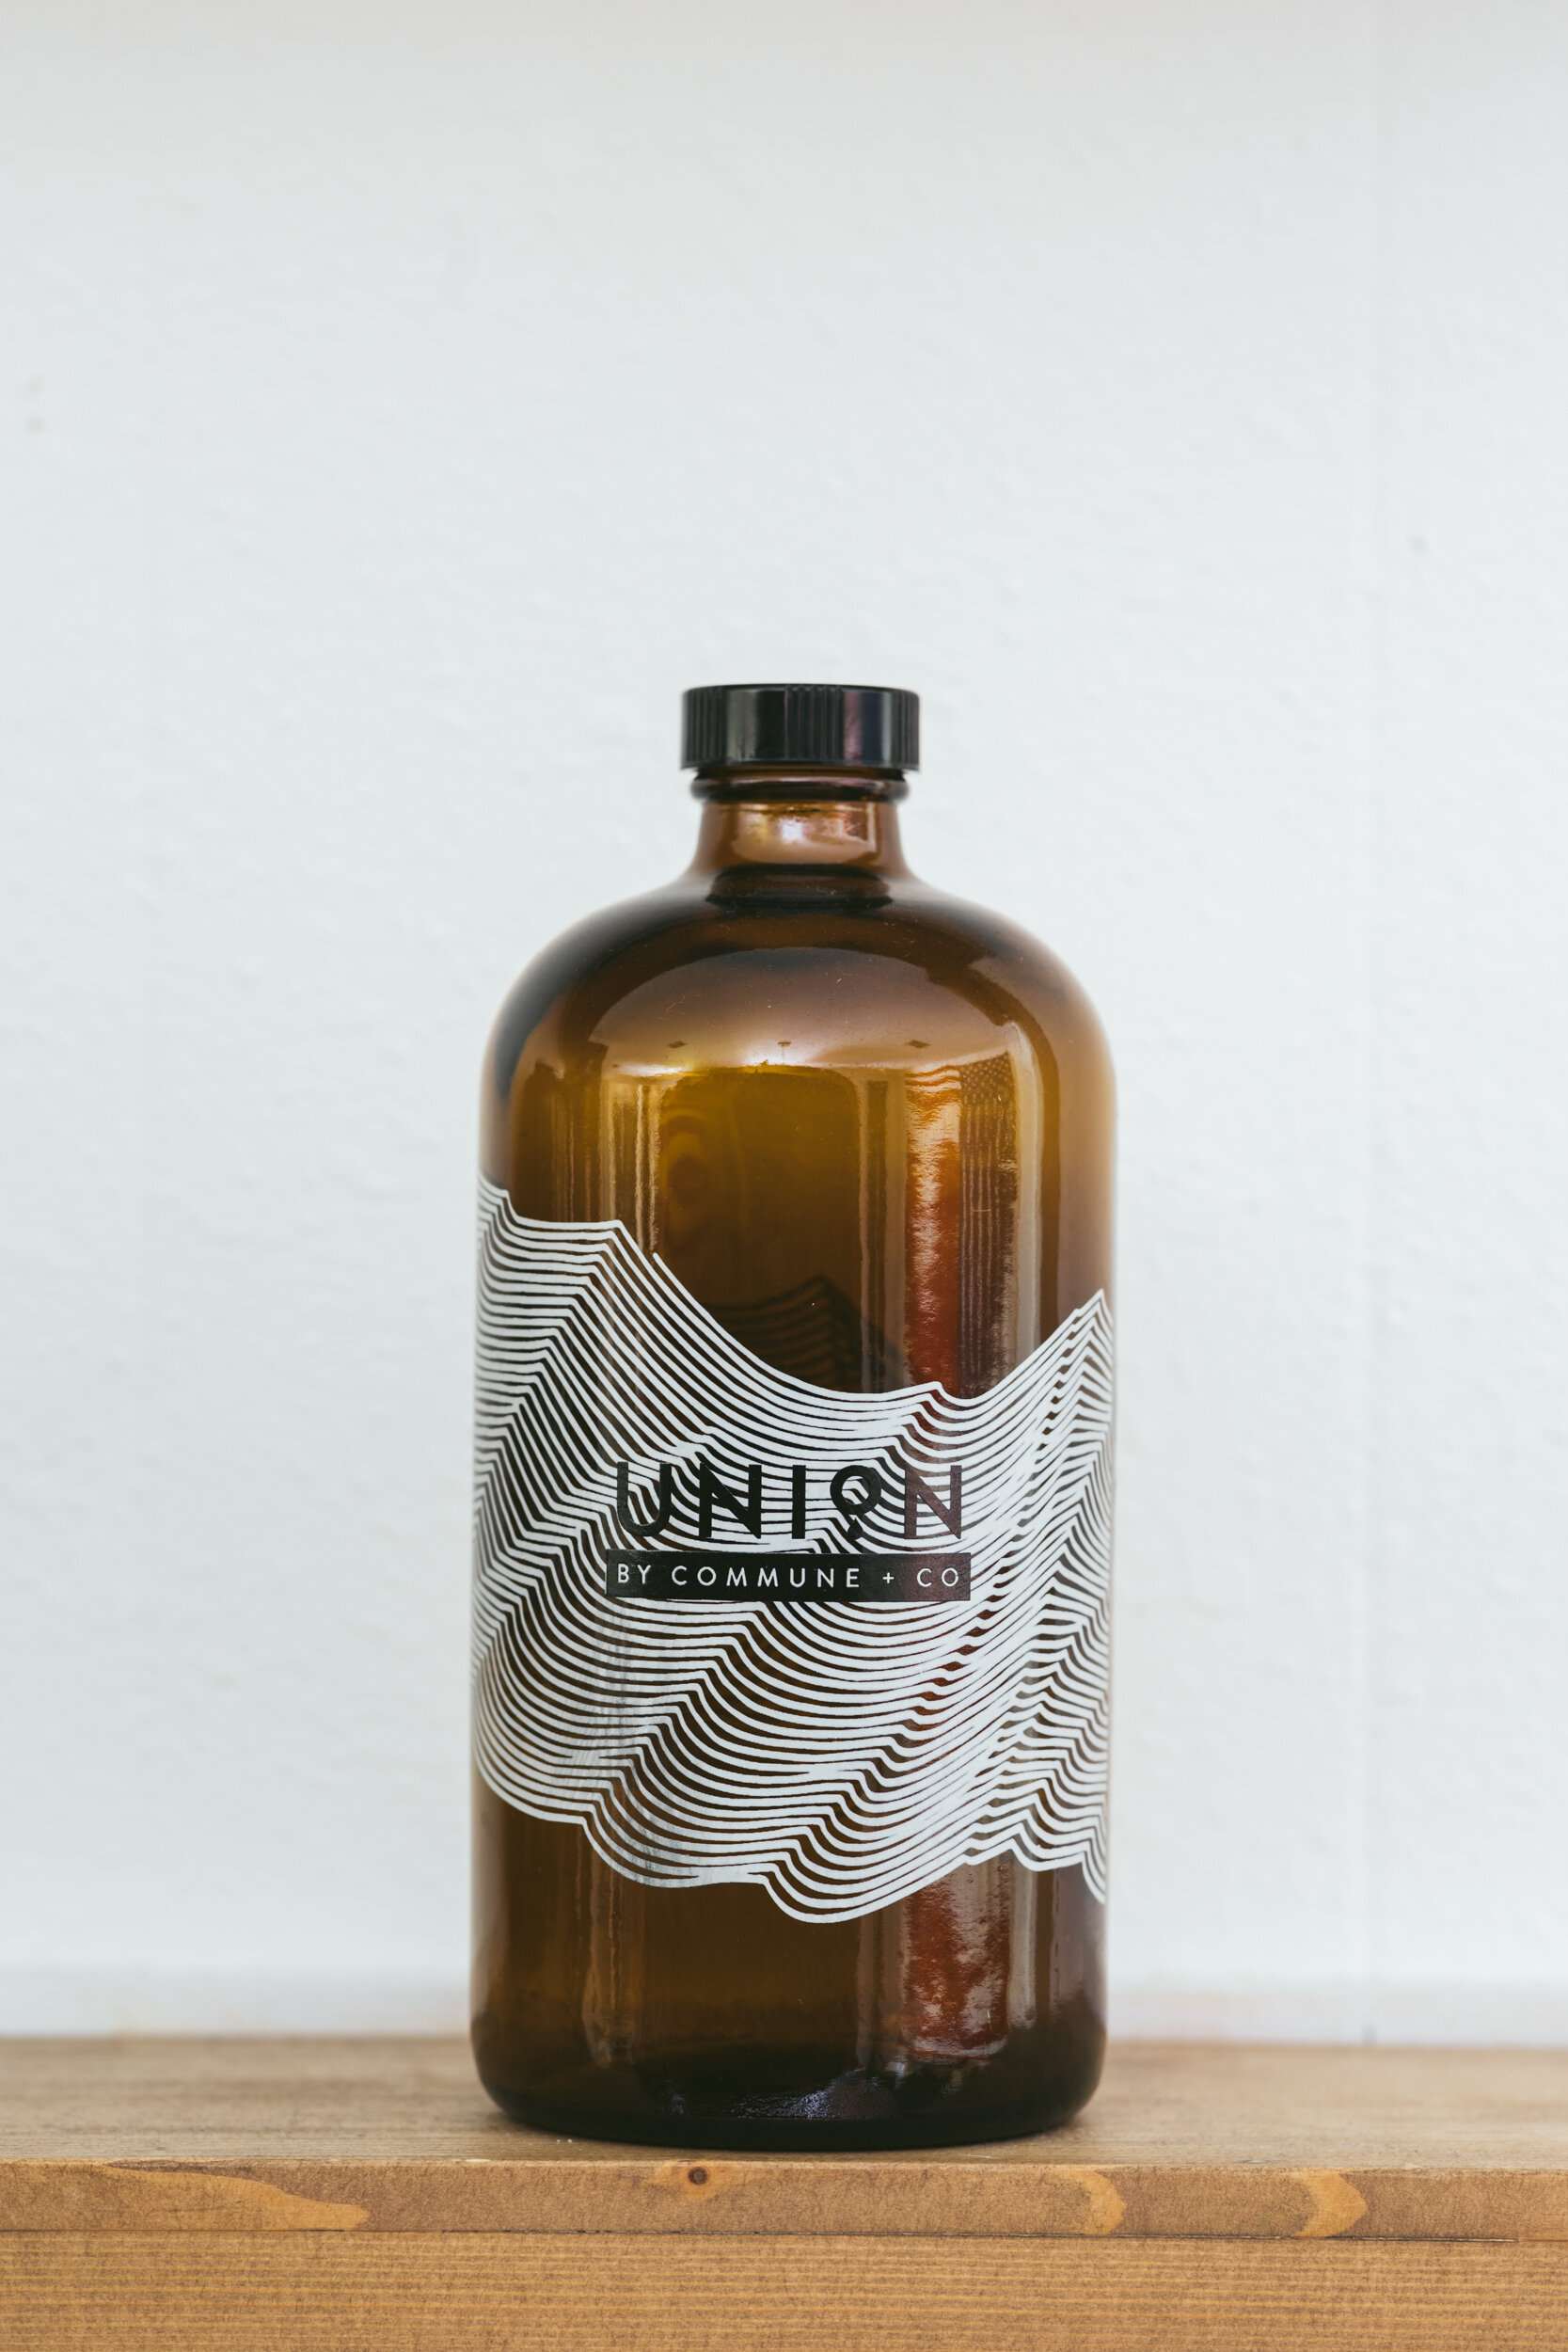 Union by Commune + Co. // Tampa, FL